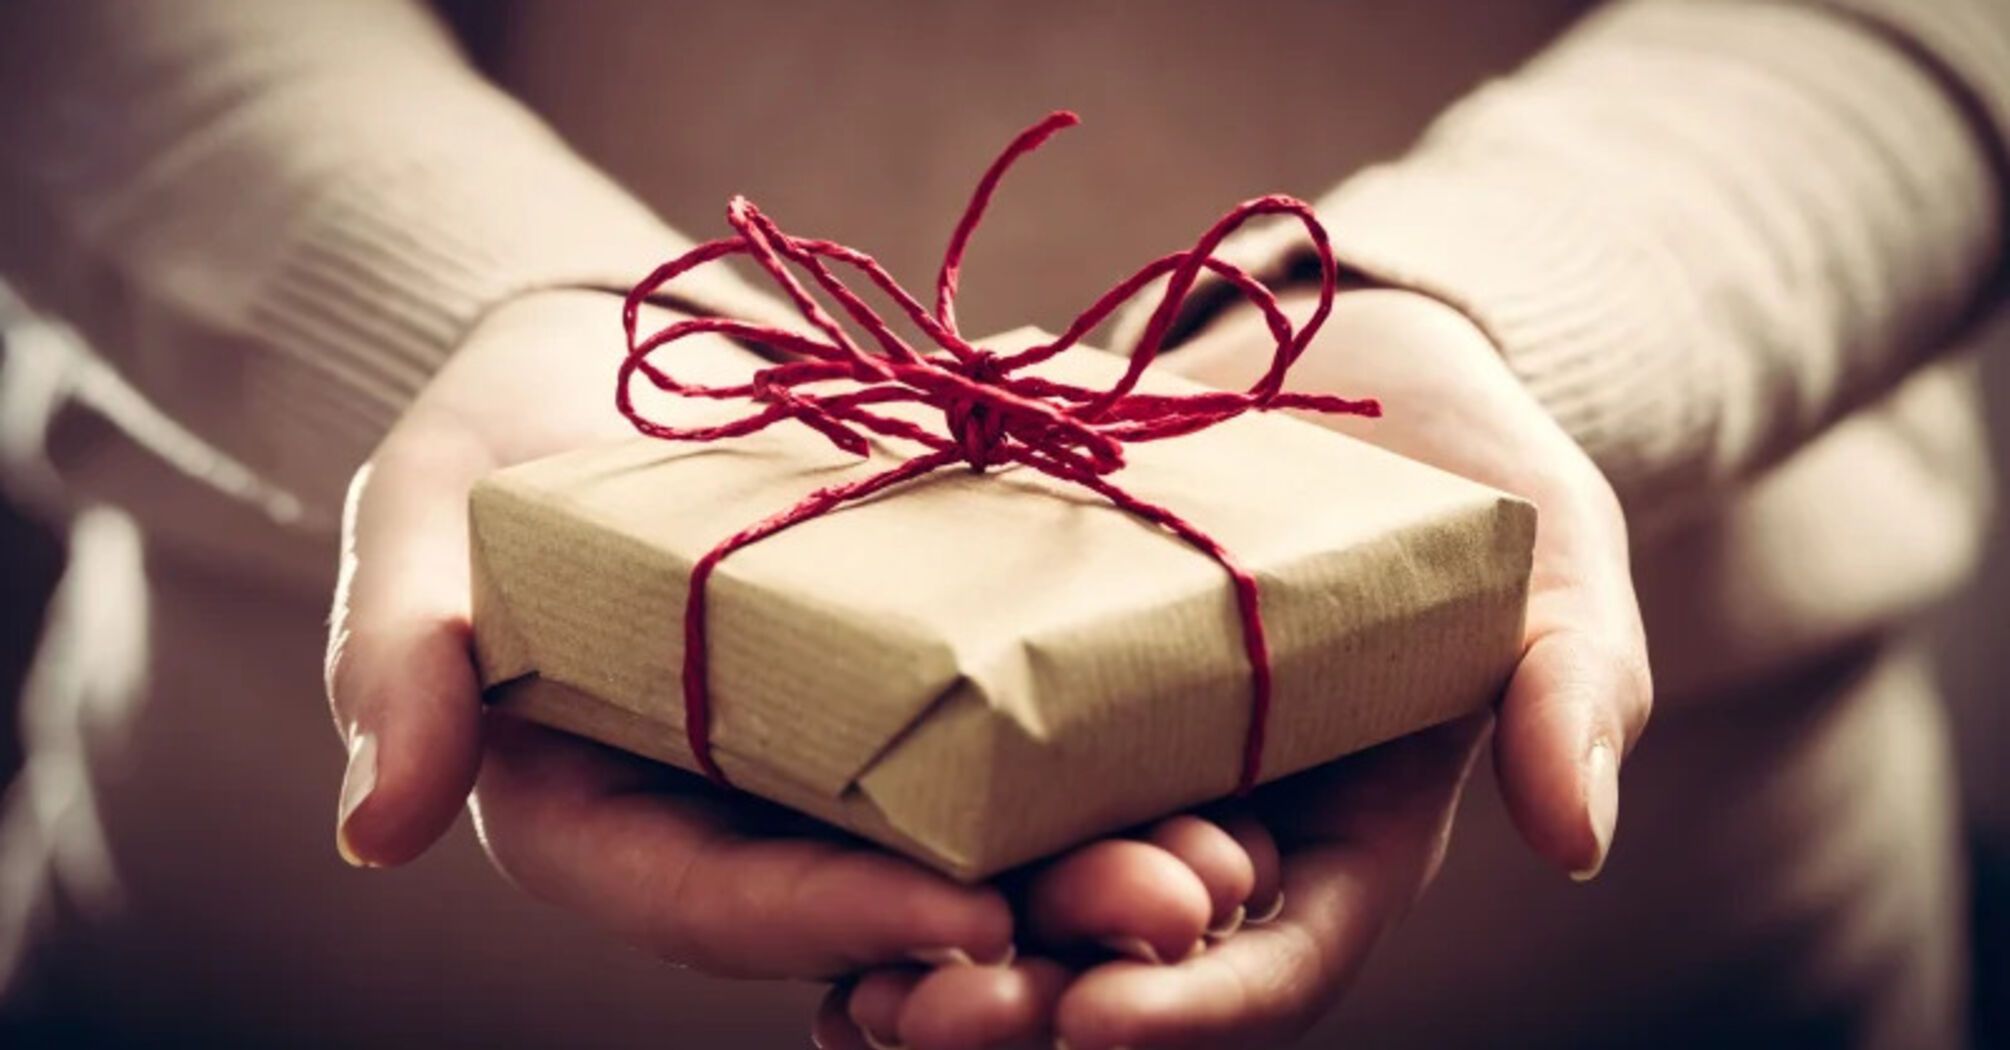 Why you can't give gifts as gifts